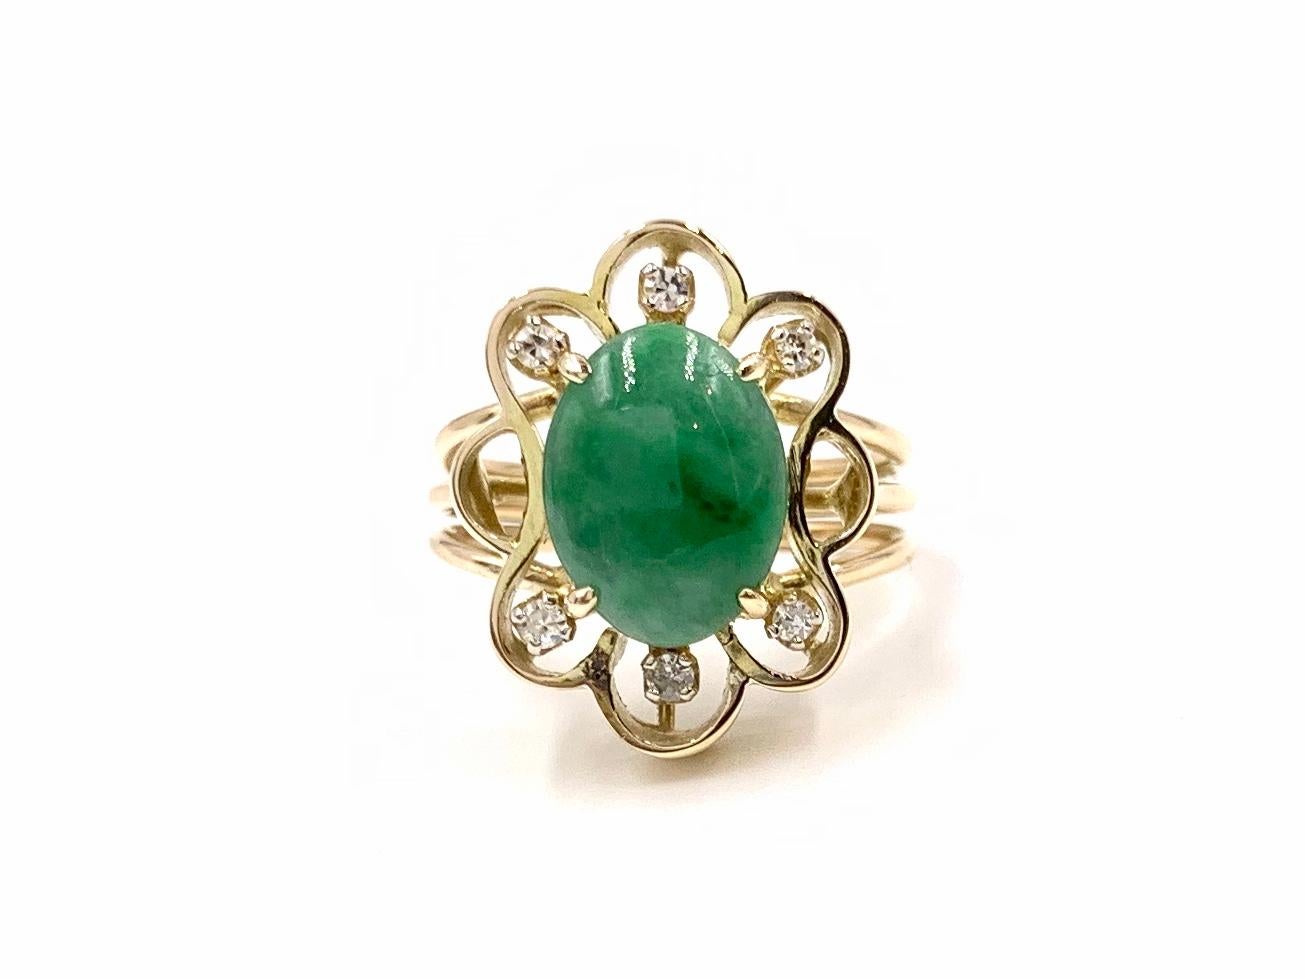 A 14k yellow gold hand made open flower design ring featuring an 11mm x 8.5mm oval genuine green jade and .06 carats of round diamonds. The green jade has an opaque transparency, smooth/reflective surface texture and exquisite natural veining